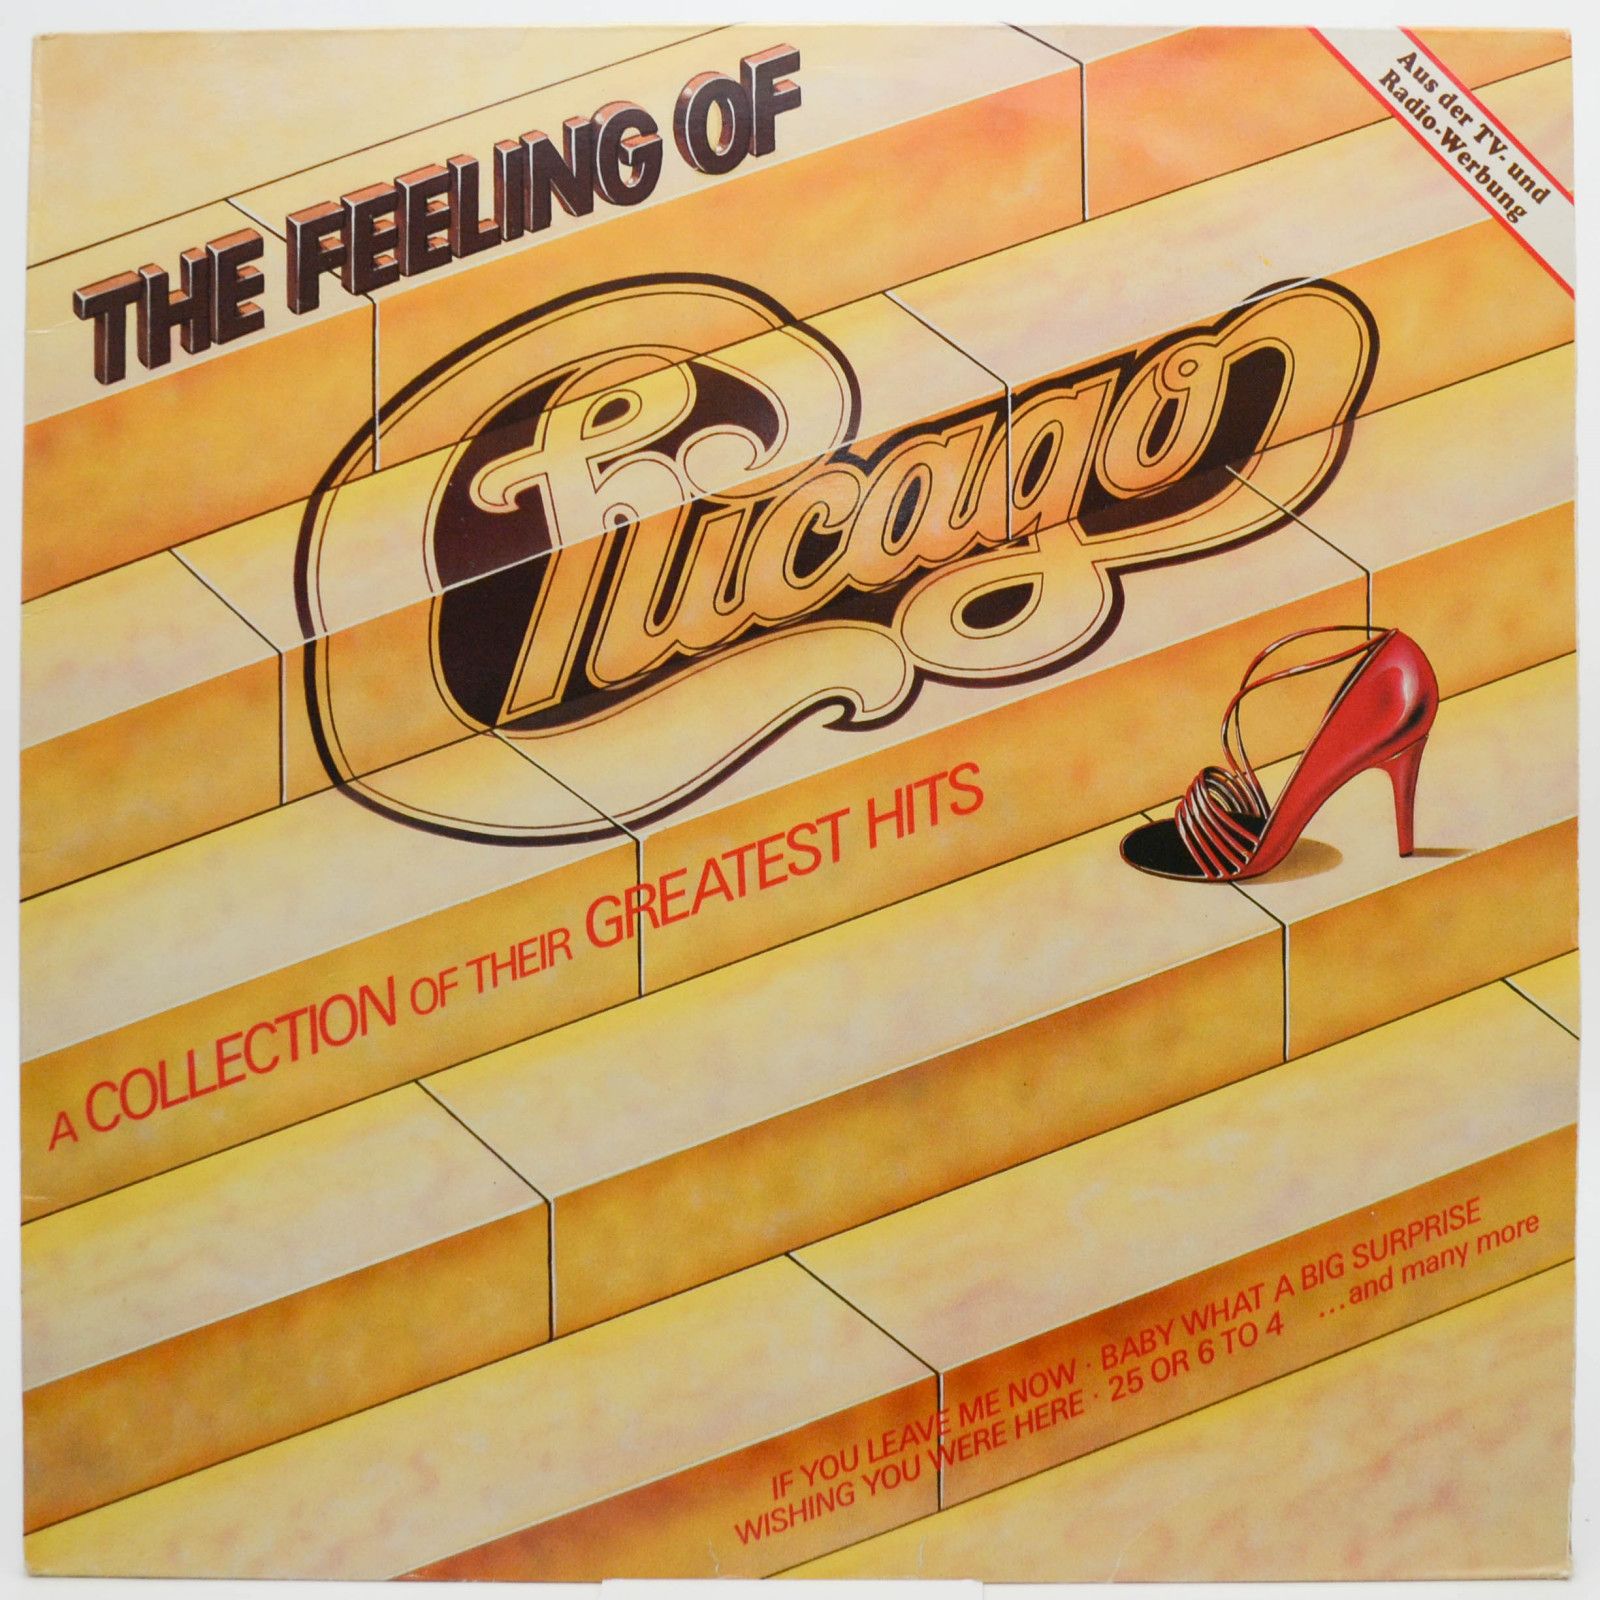 Chicago — The Feeling Of (A Collection Of Their Greatest Hits), 1982